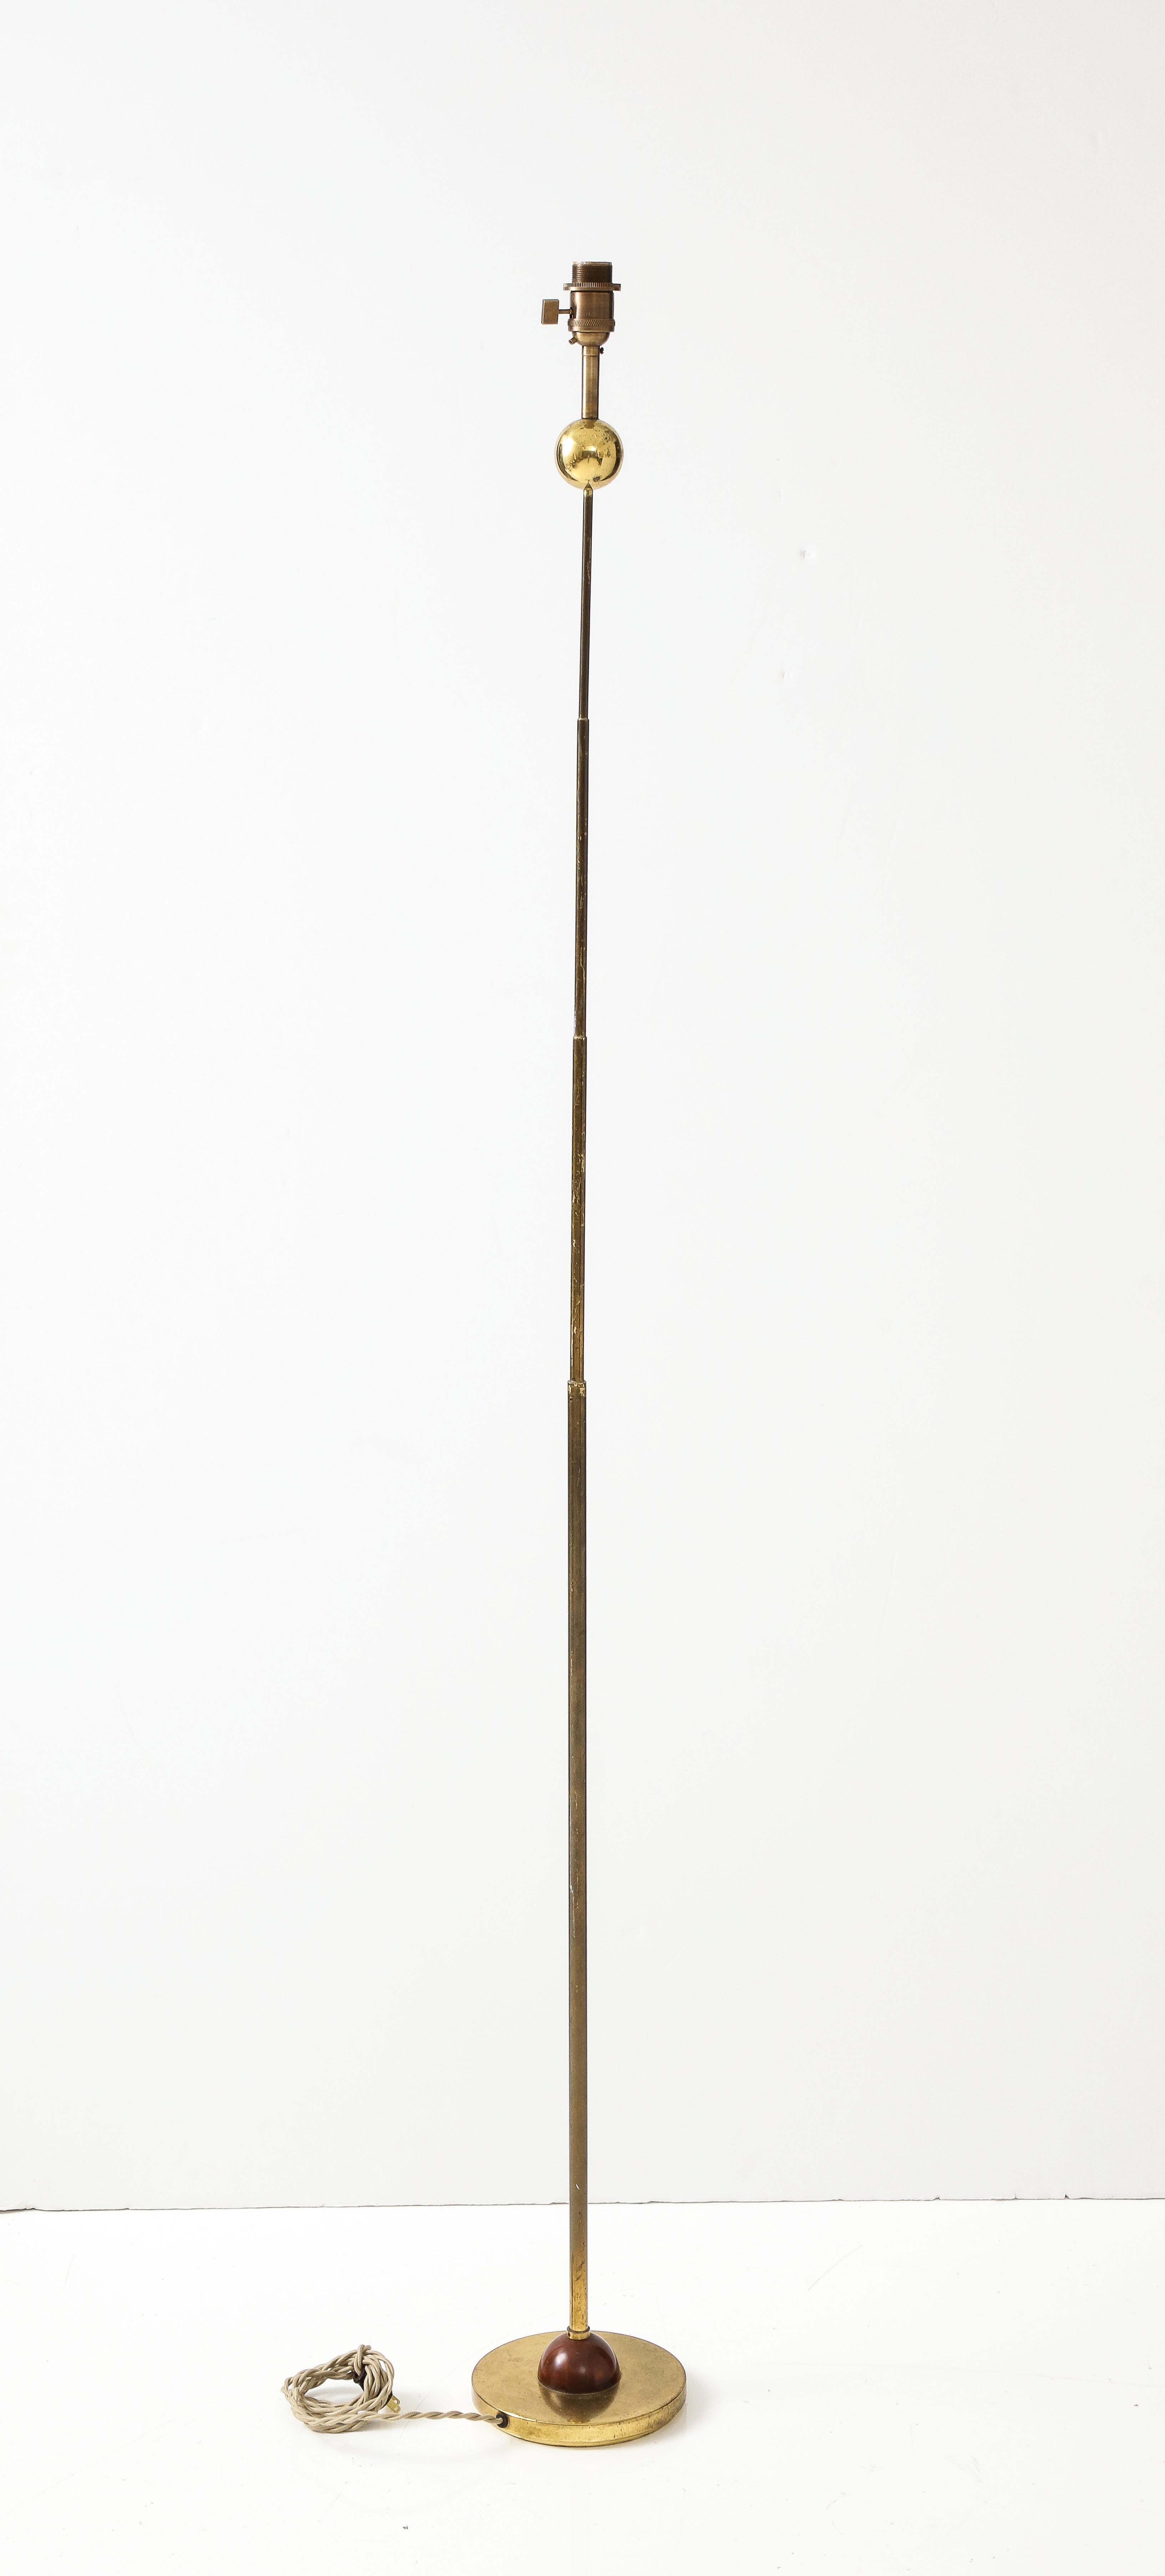 Minimalist & modernist gilt bronze floor lamp with elegant copper details on the base. Rewired for use in the US.
No shade included.